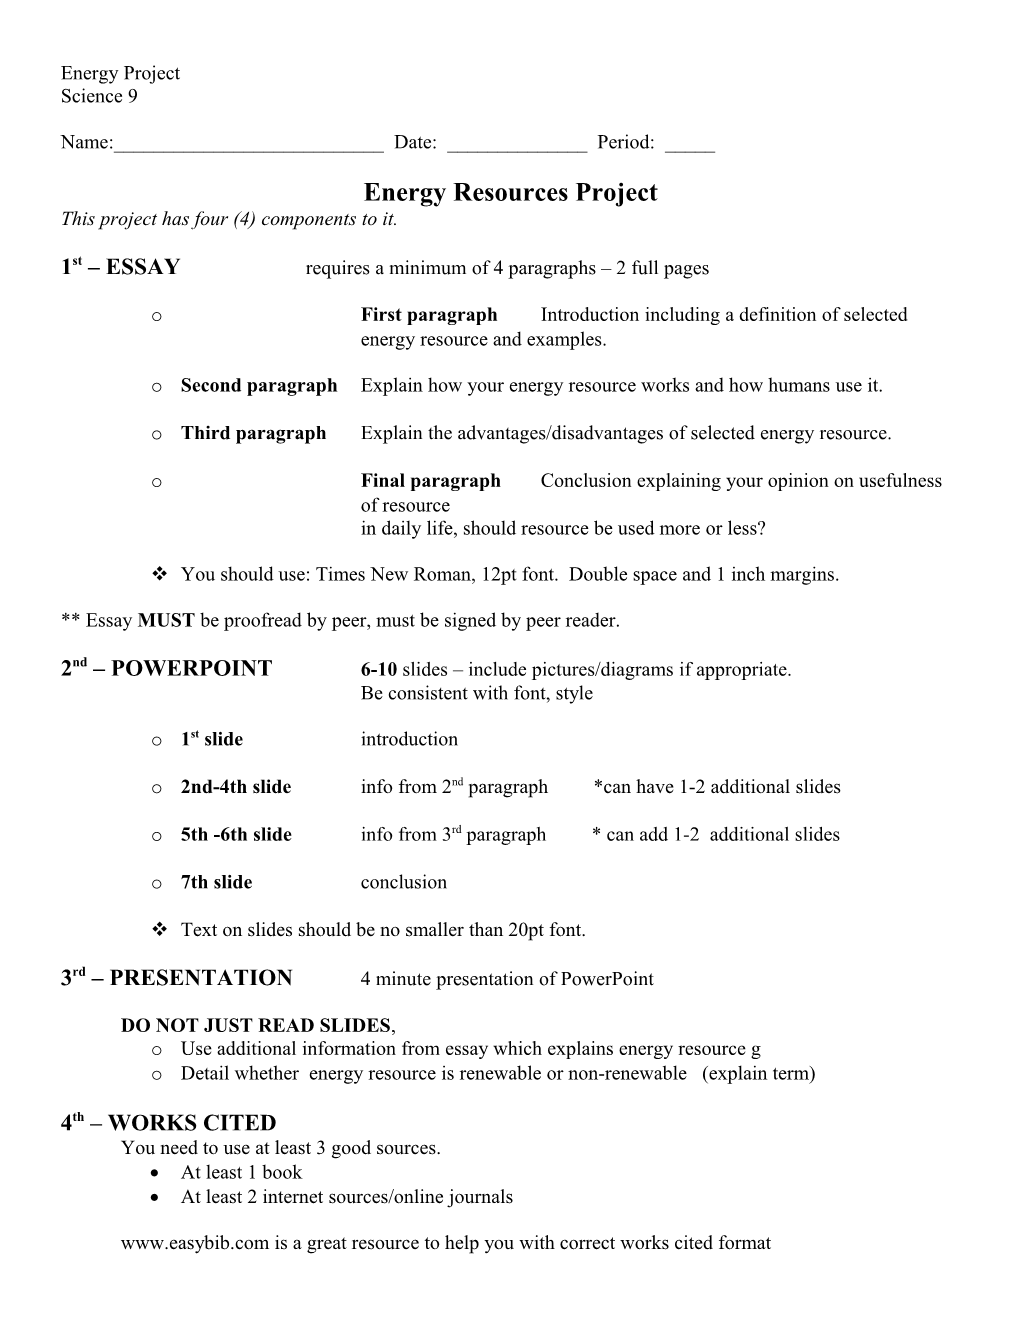 Energy Resources Project